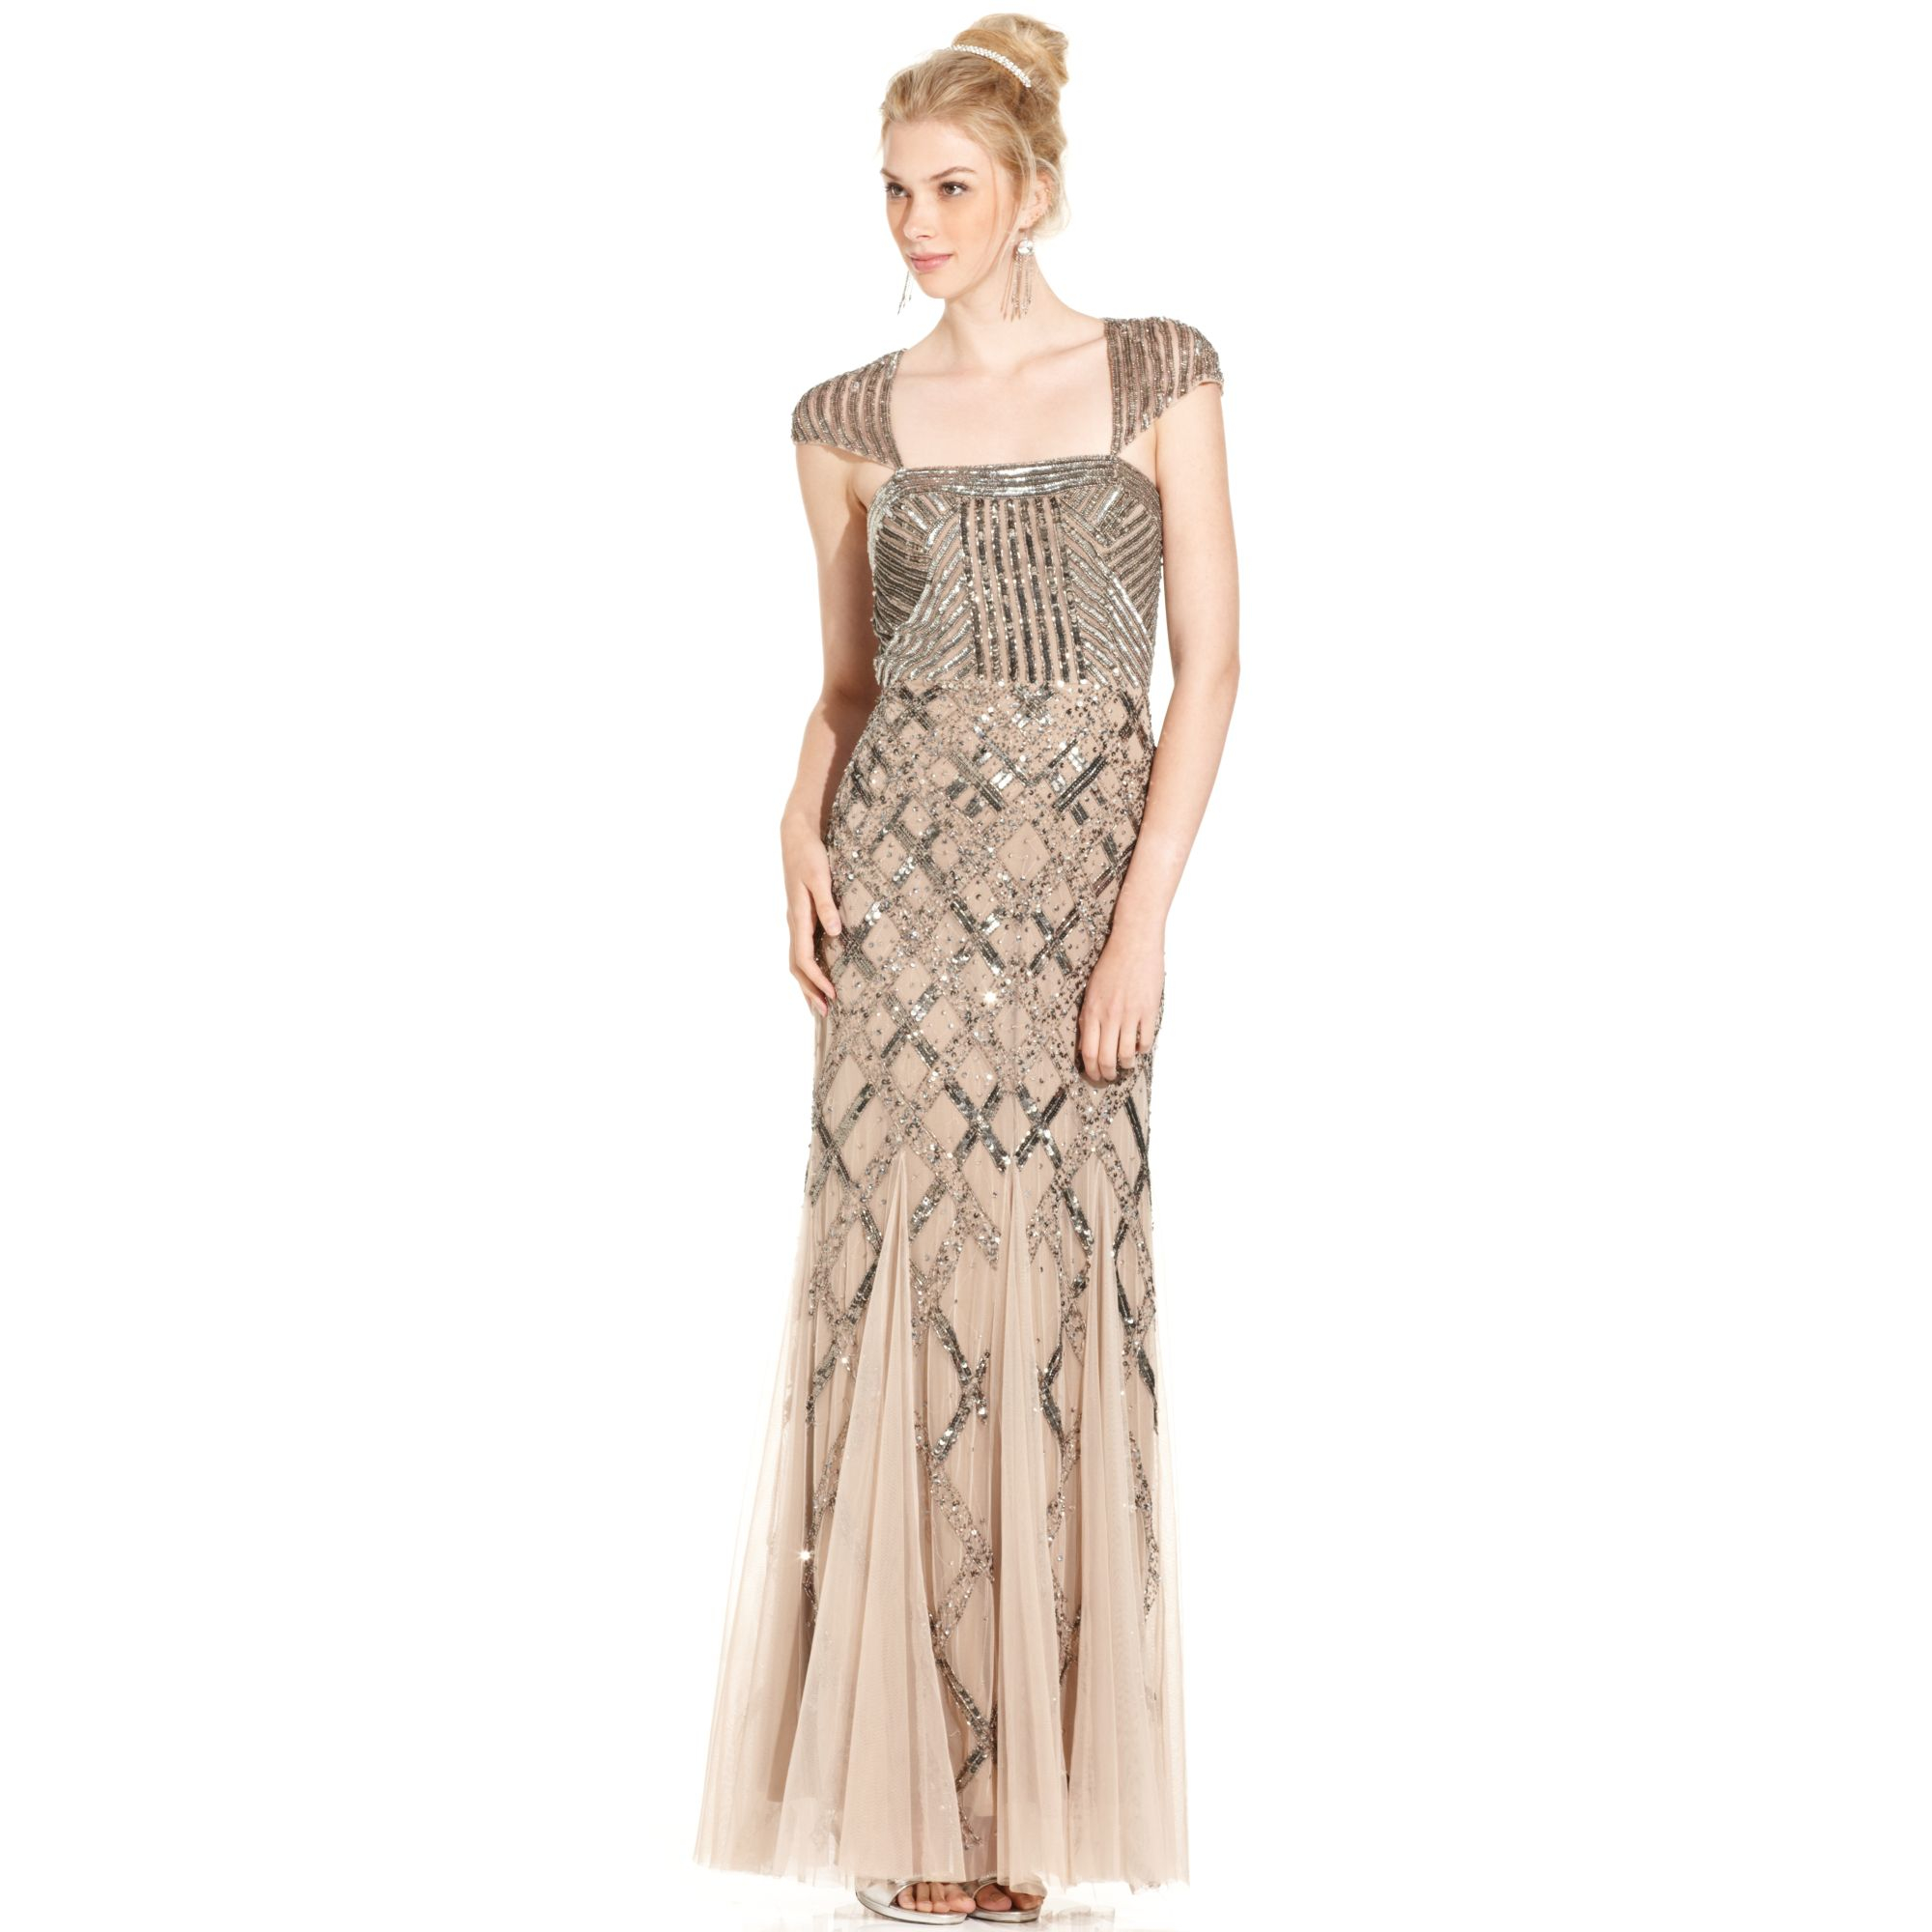 Adrianna Papell Petite Capsleeve Sequined Beaded Gown in Beige (Nude